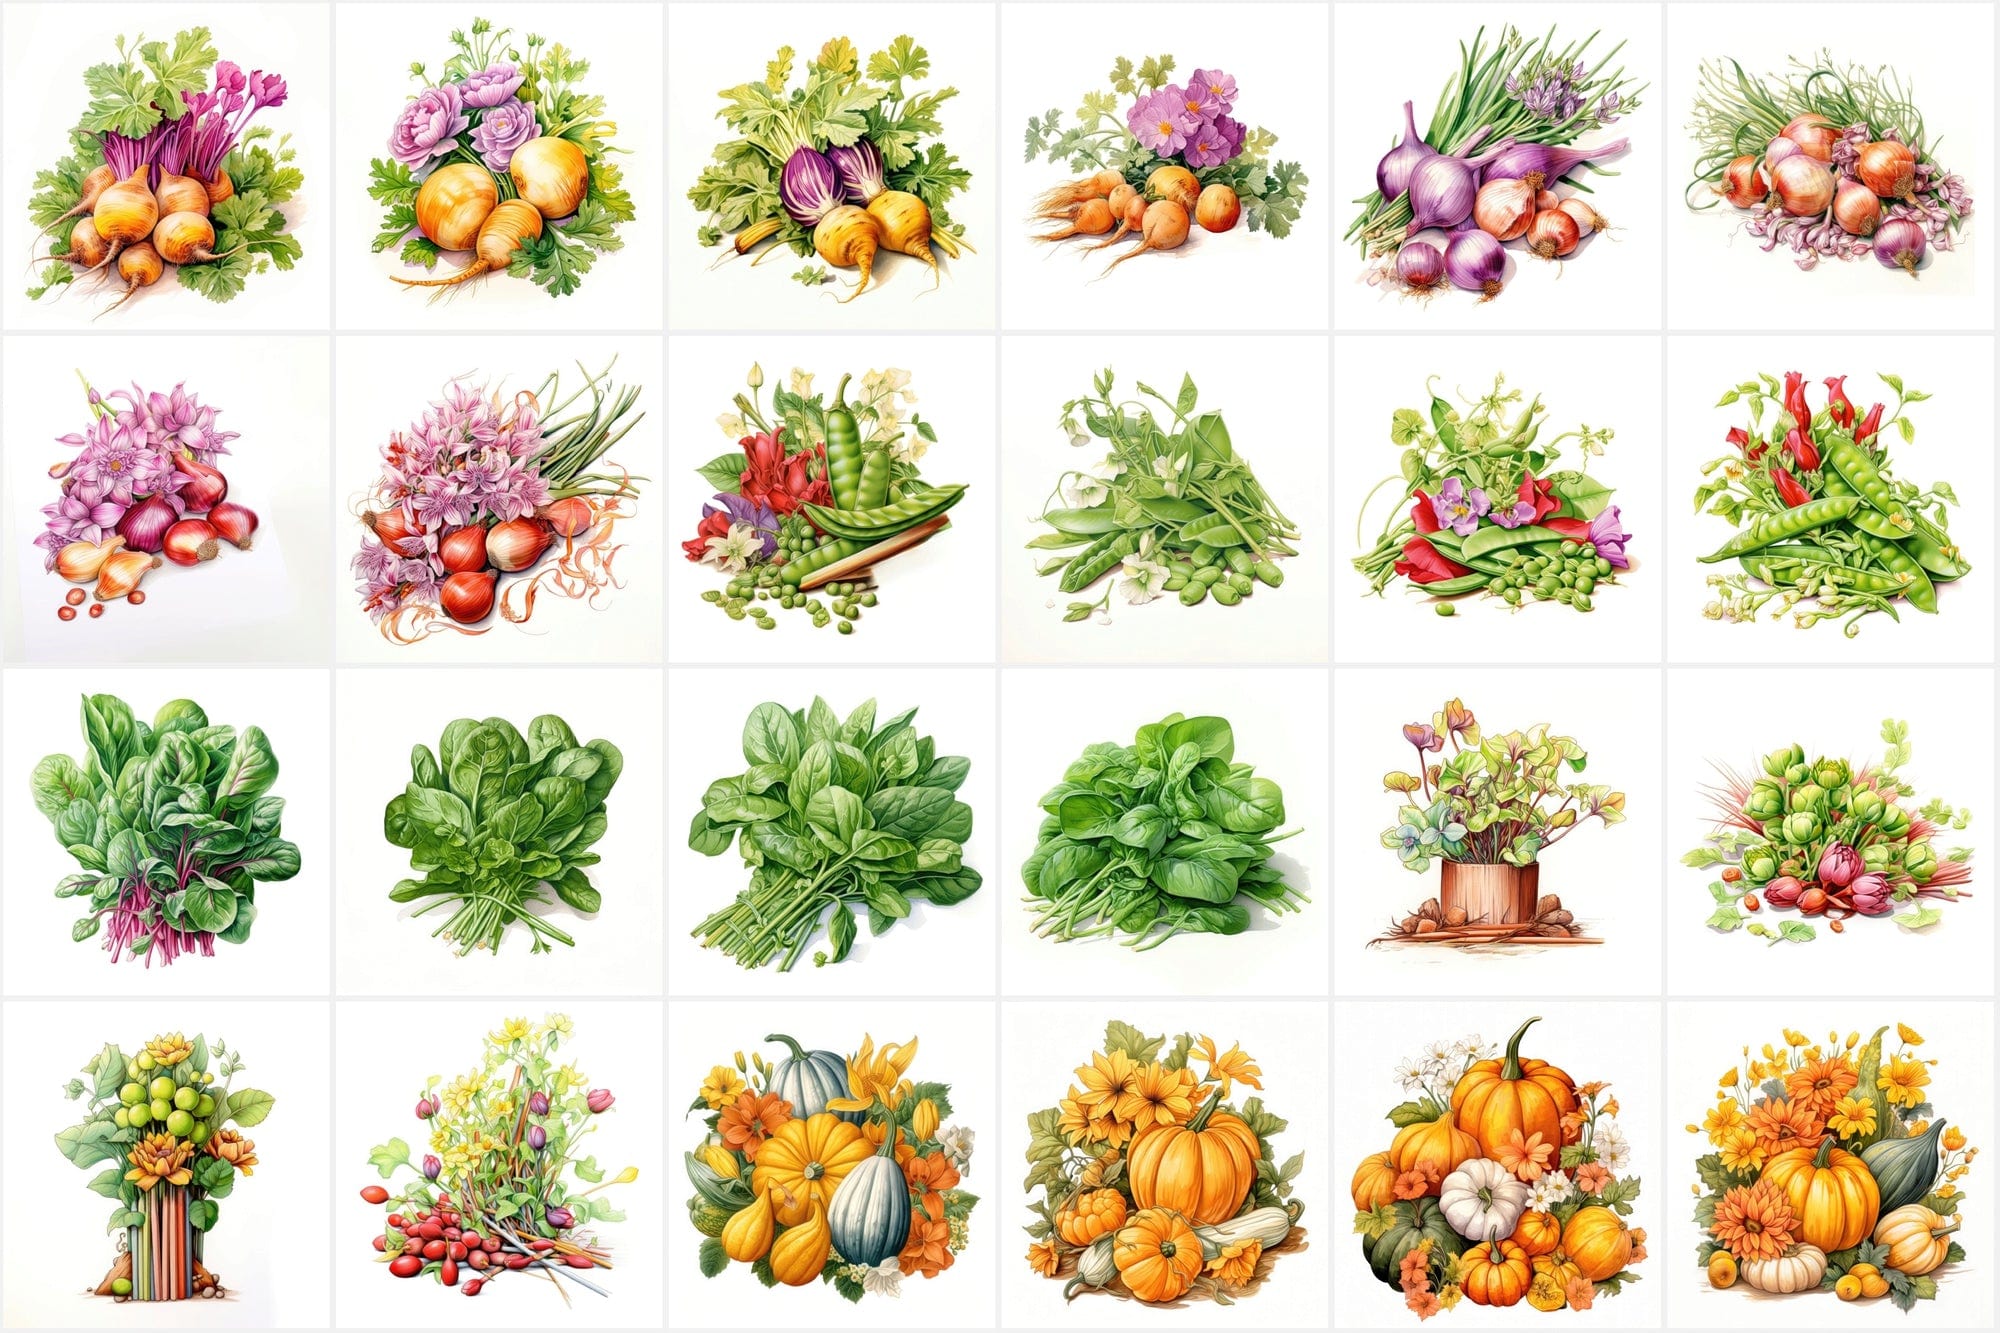 Colorful Vegetable Images with Flowers & Leaves - High Resolution PNG Files with Commercial License Digital Download Sumobundle